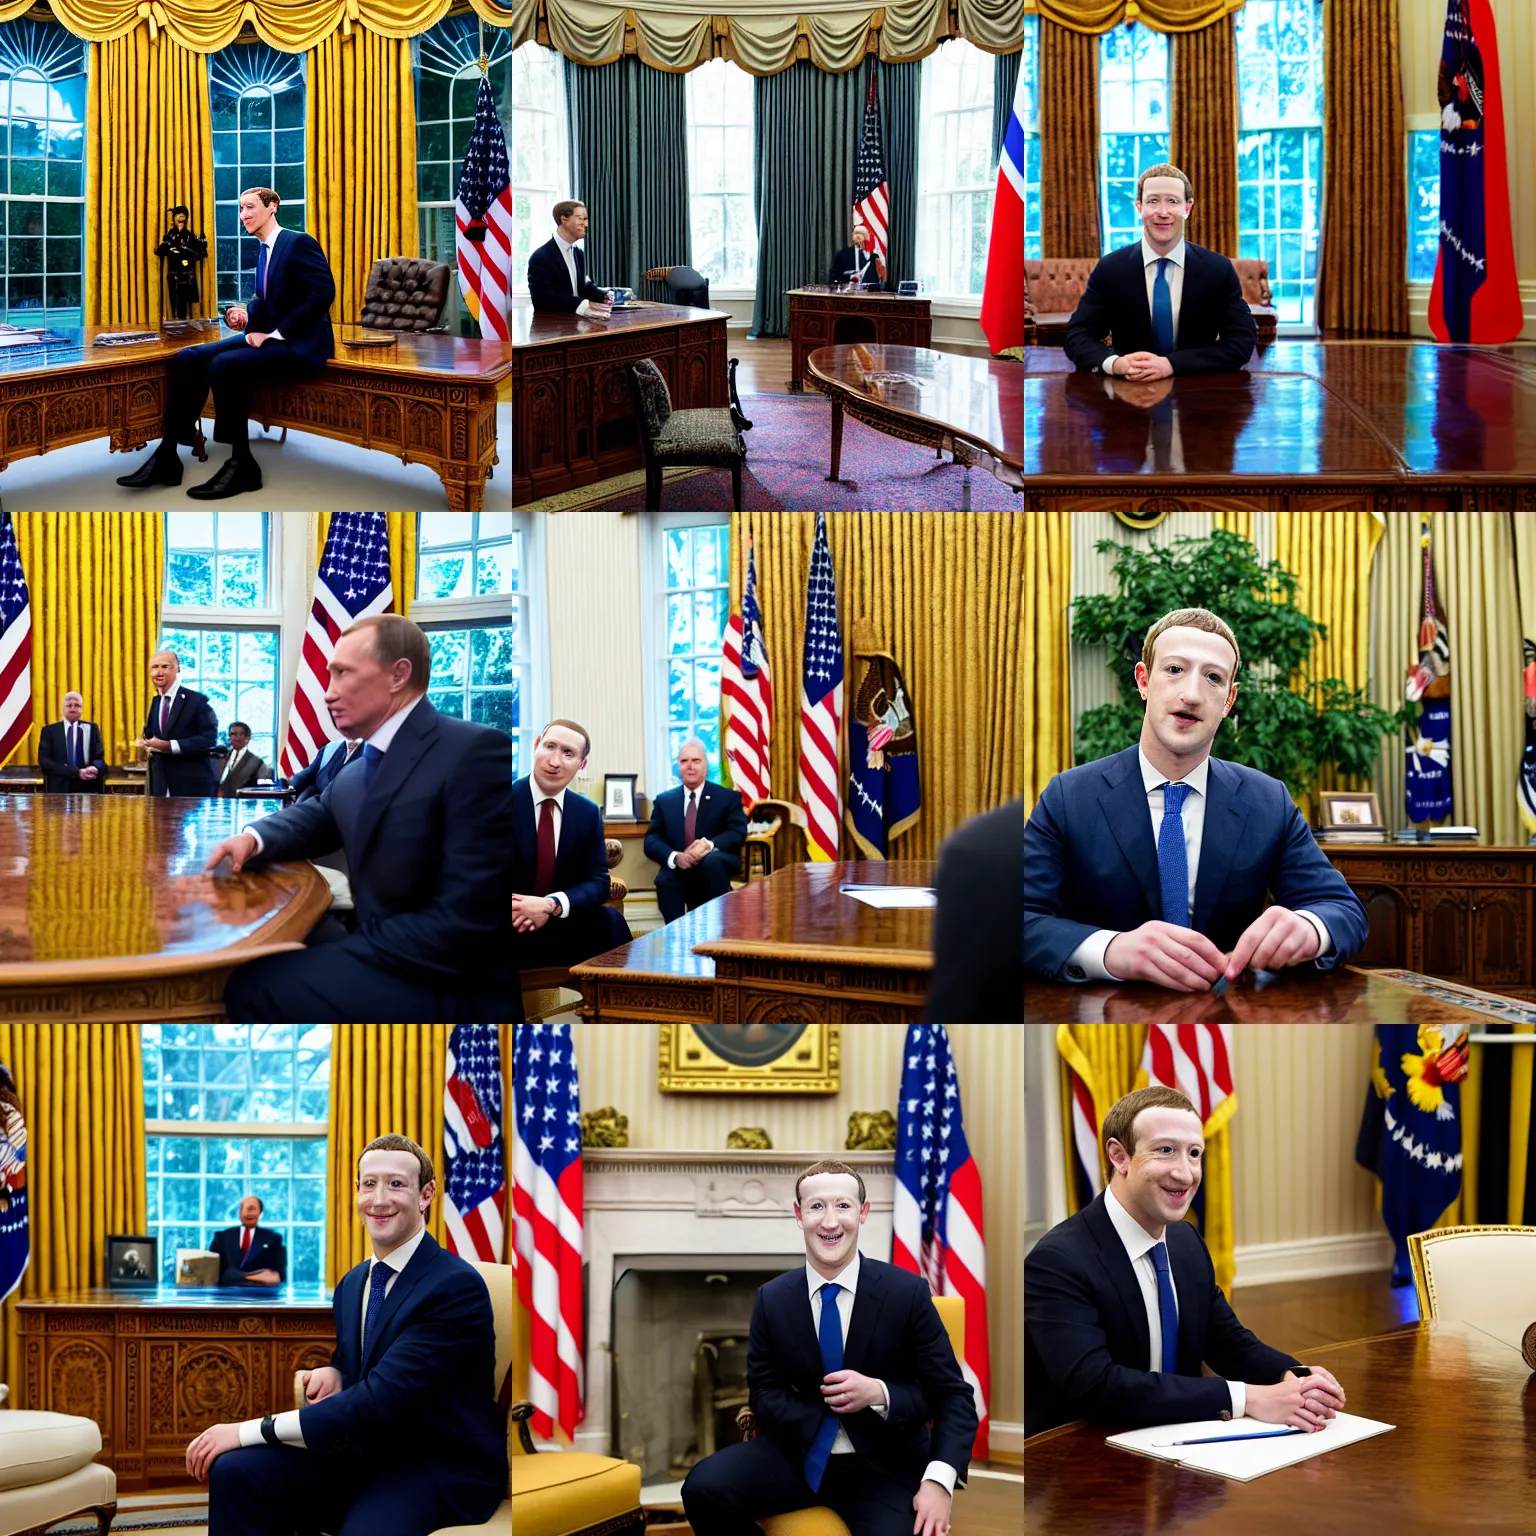 Prompt: headshot of Mark Zuckerberg the president of the united states meeting with Vladmir putin in the oval office, EOS-1D, f/1.4, ISO 200, 1/160s, 8K, RAW, unedited, symmetrical balance, in-frame, Photoshop, Nvidia, Topaz AI